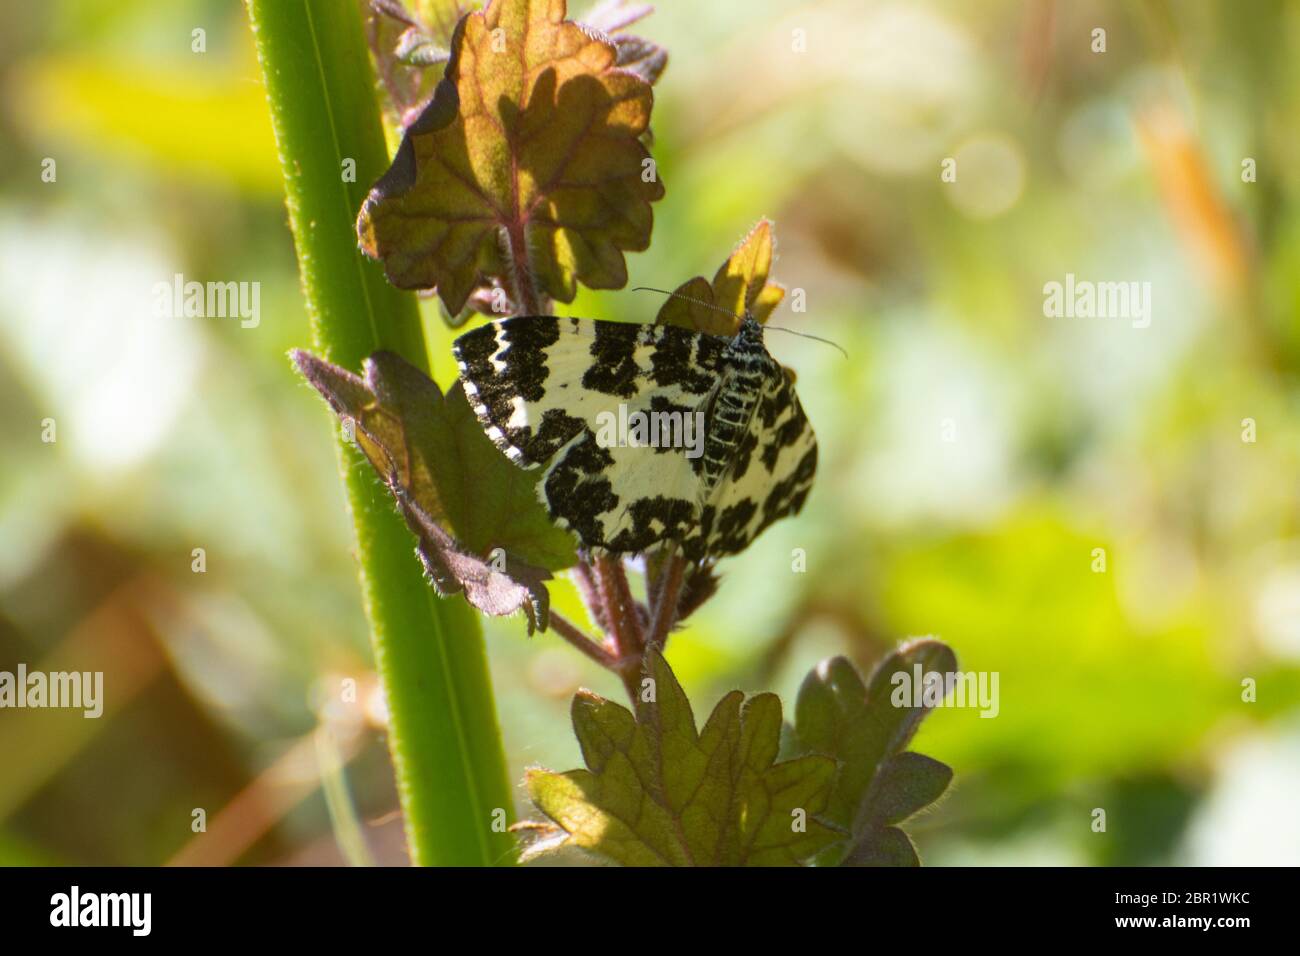 Argent and sable moth (Rheumaptera hastate), a day-flying moth of the family Geometridae with black and white markings, UK Stock Photo